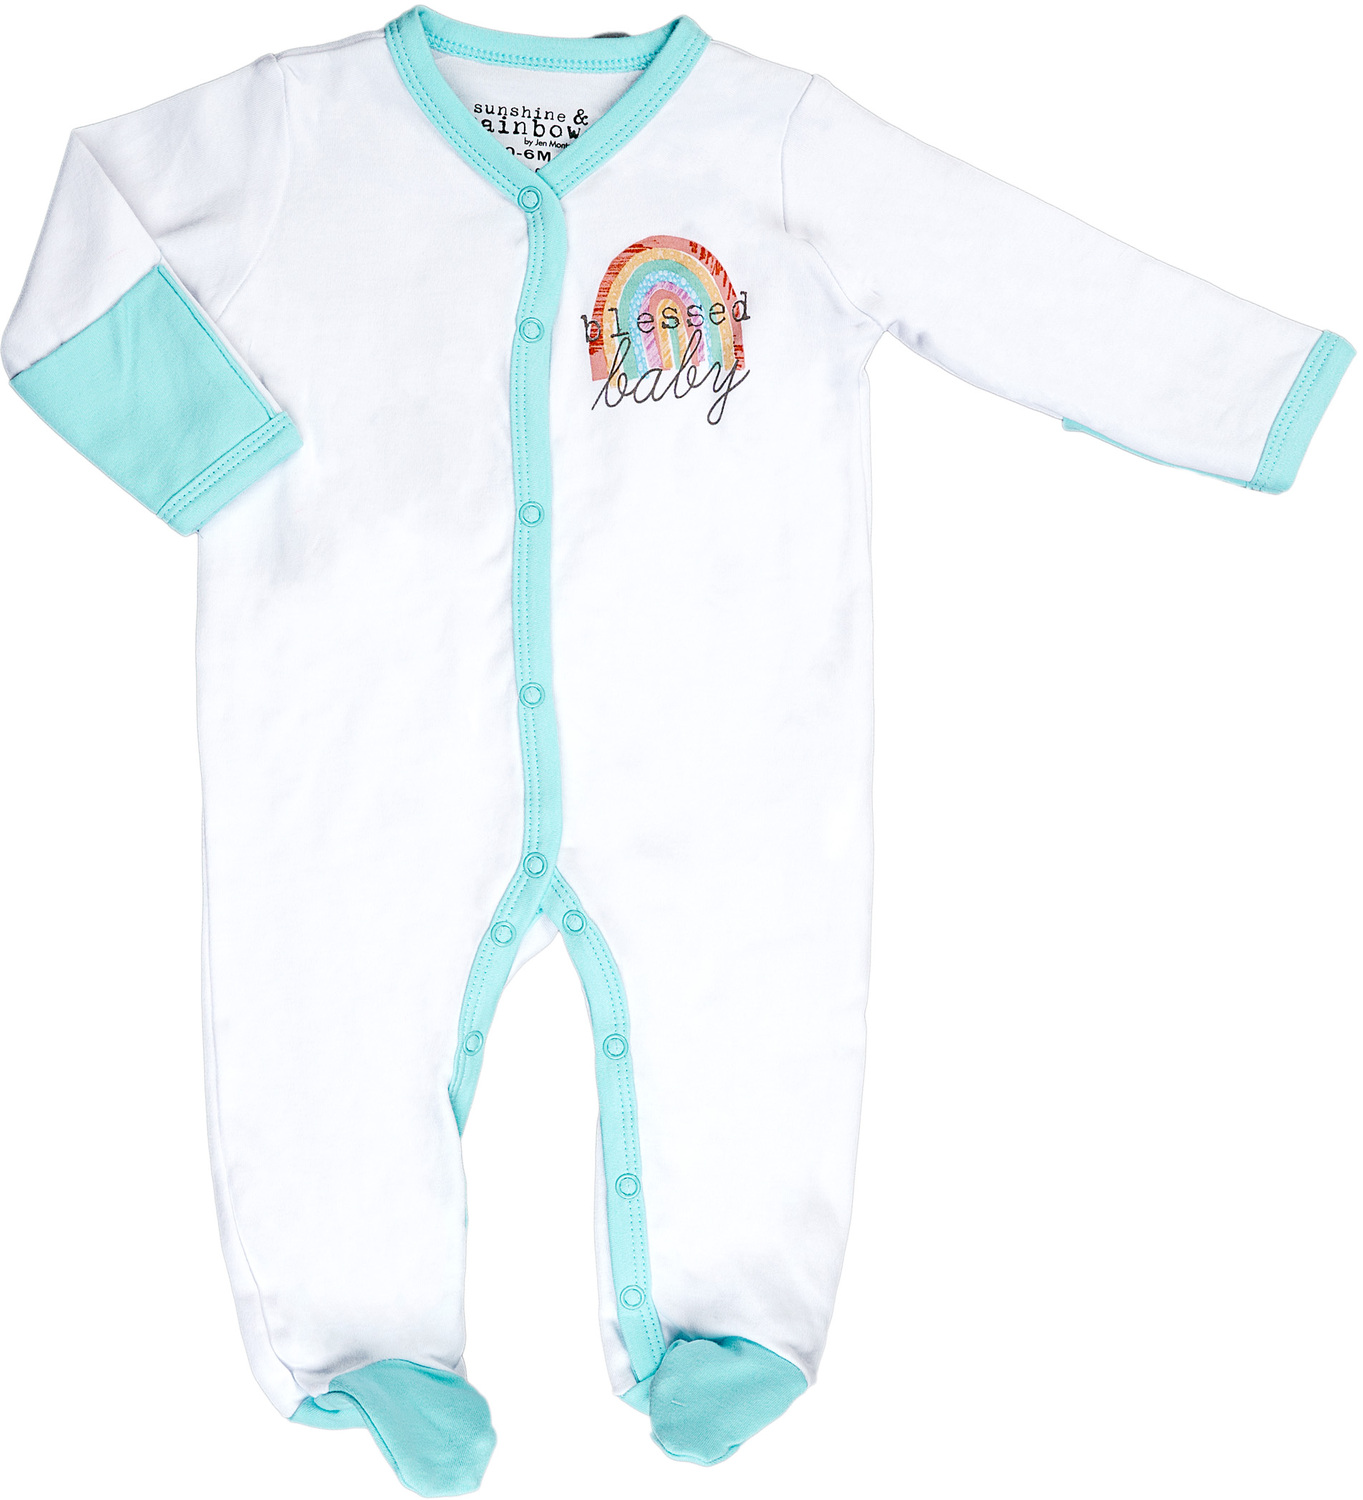 Blessed Baby by Sunshine & Rainbows - Blessed Baby - 0-6 Months
Teal Trimmed Sleeper